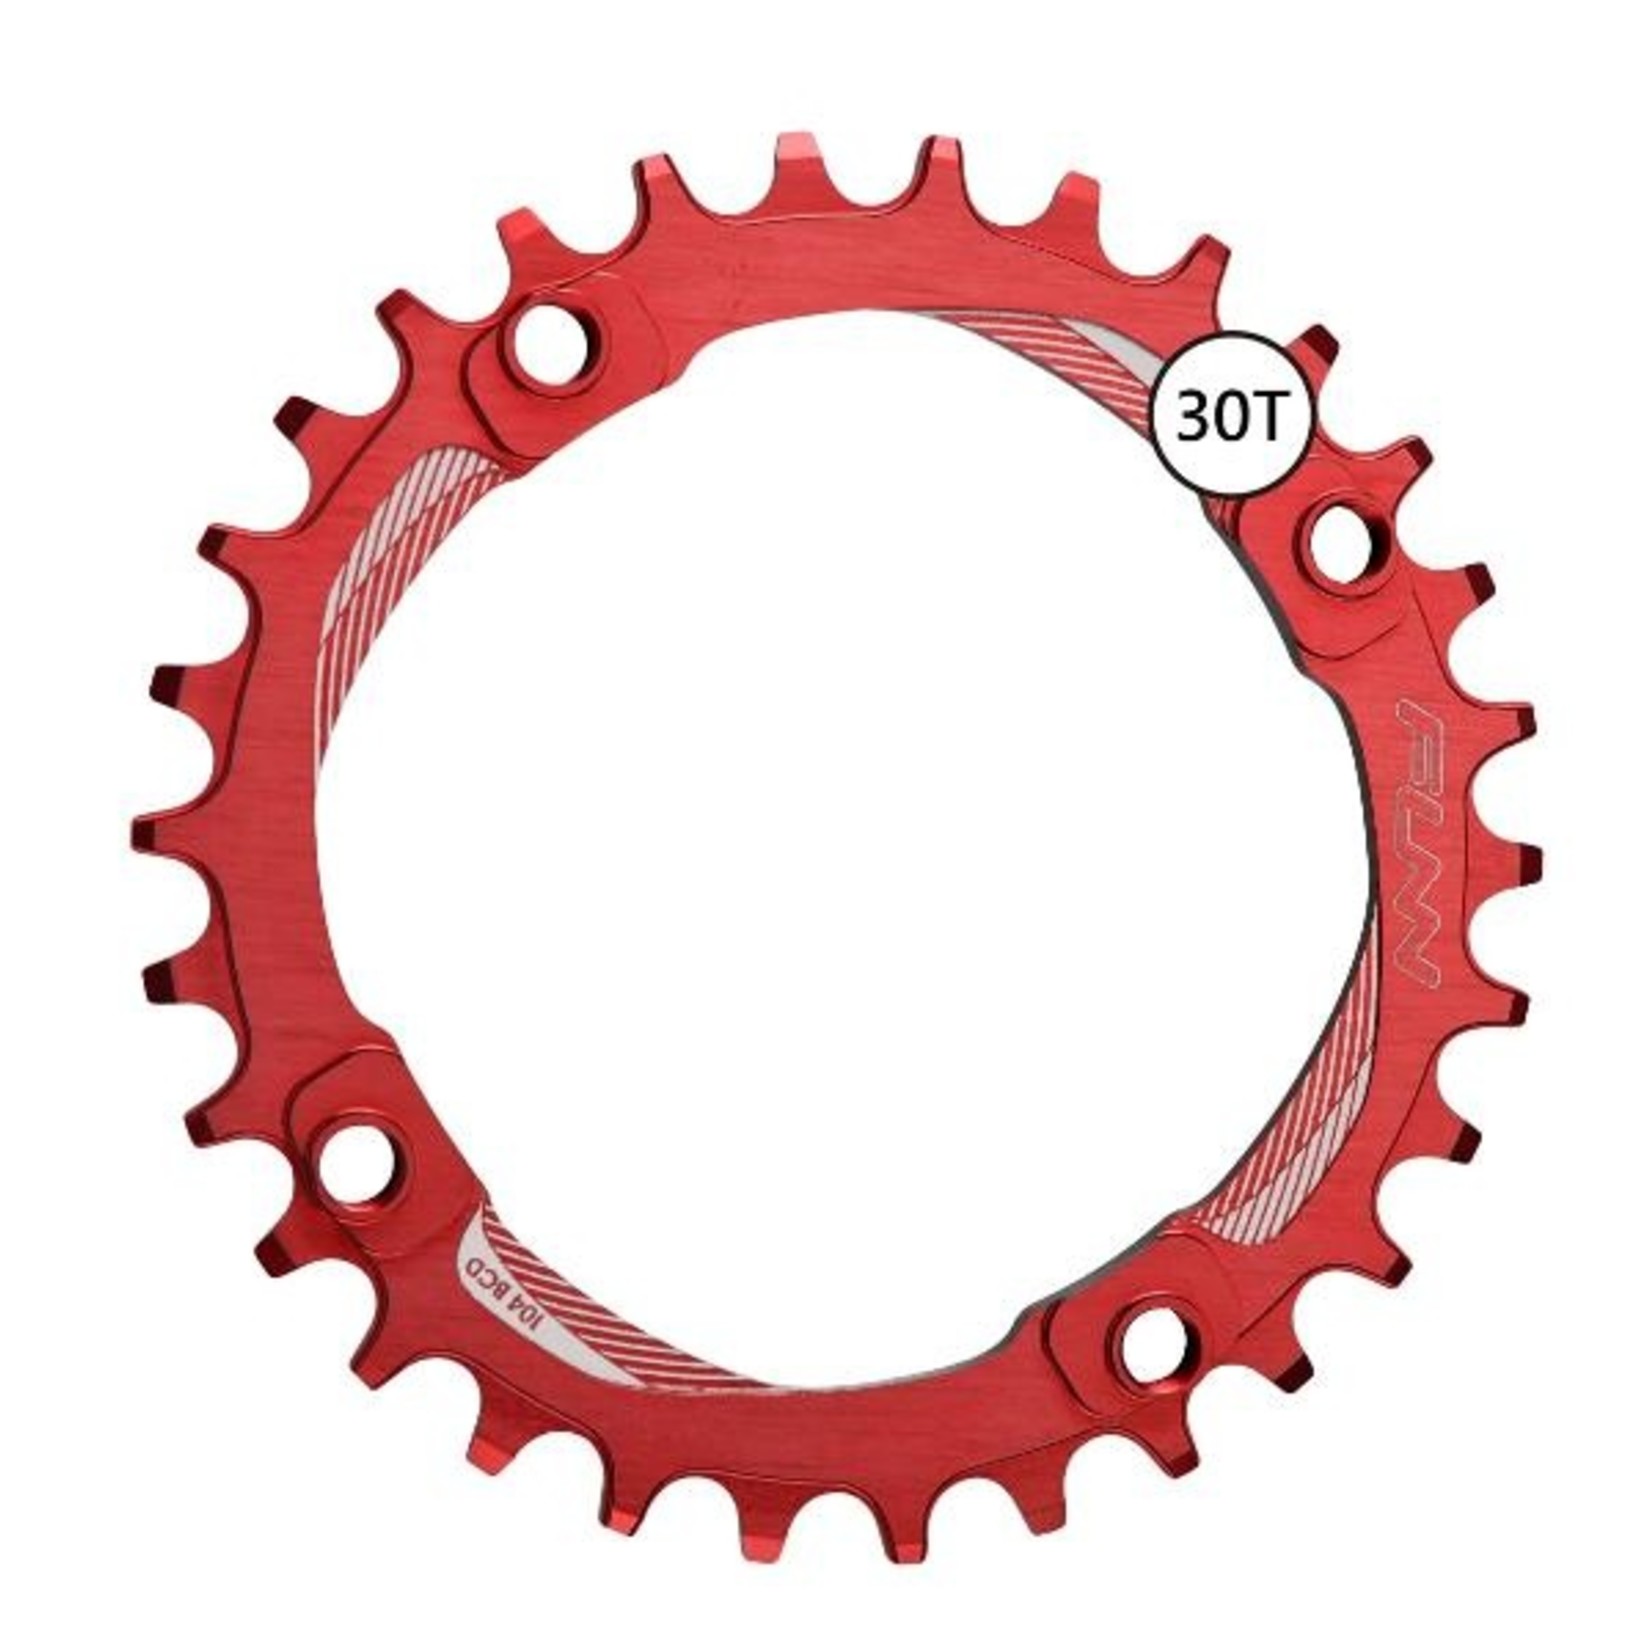 FUNN Funn Bicycle Chain Ring - Solo Narrow-Wide - 30T - 104mm BCD - Red